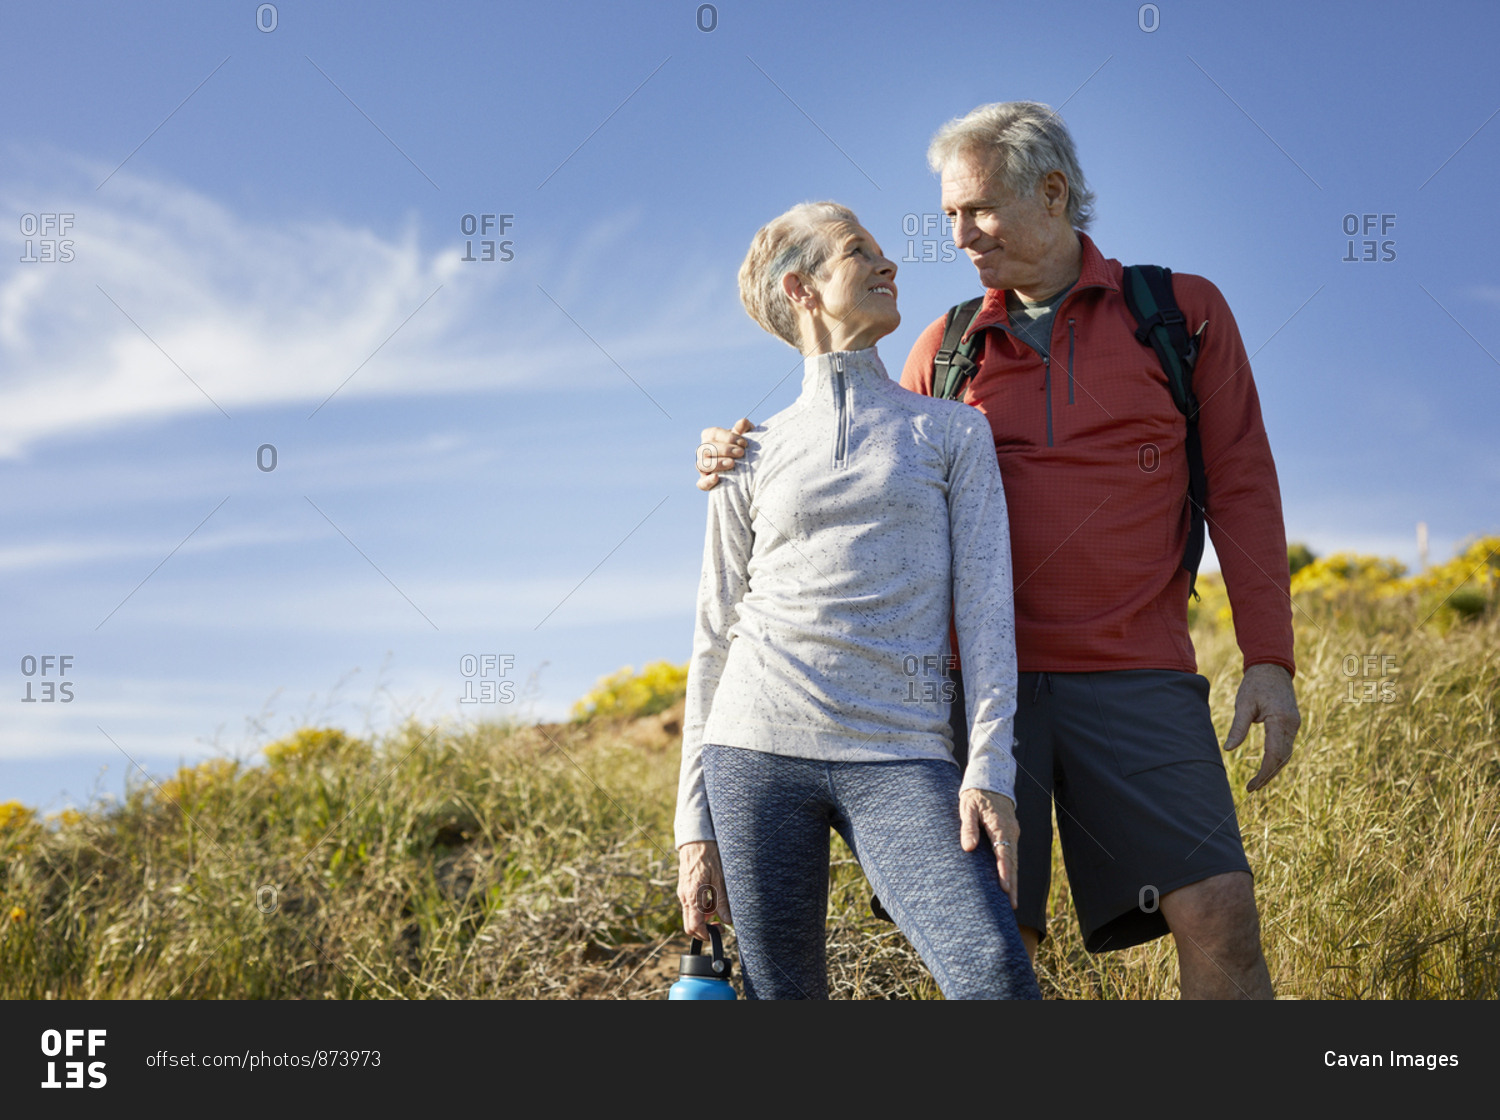 Low angle view of smiling senior couple looking at each other while standing on cliff against blue sky during sunny day